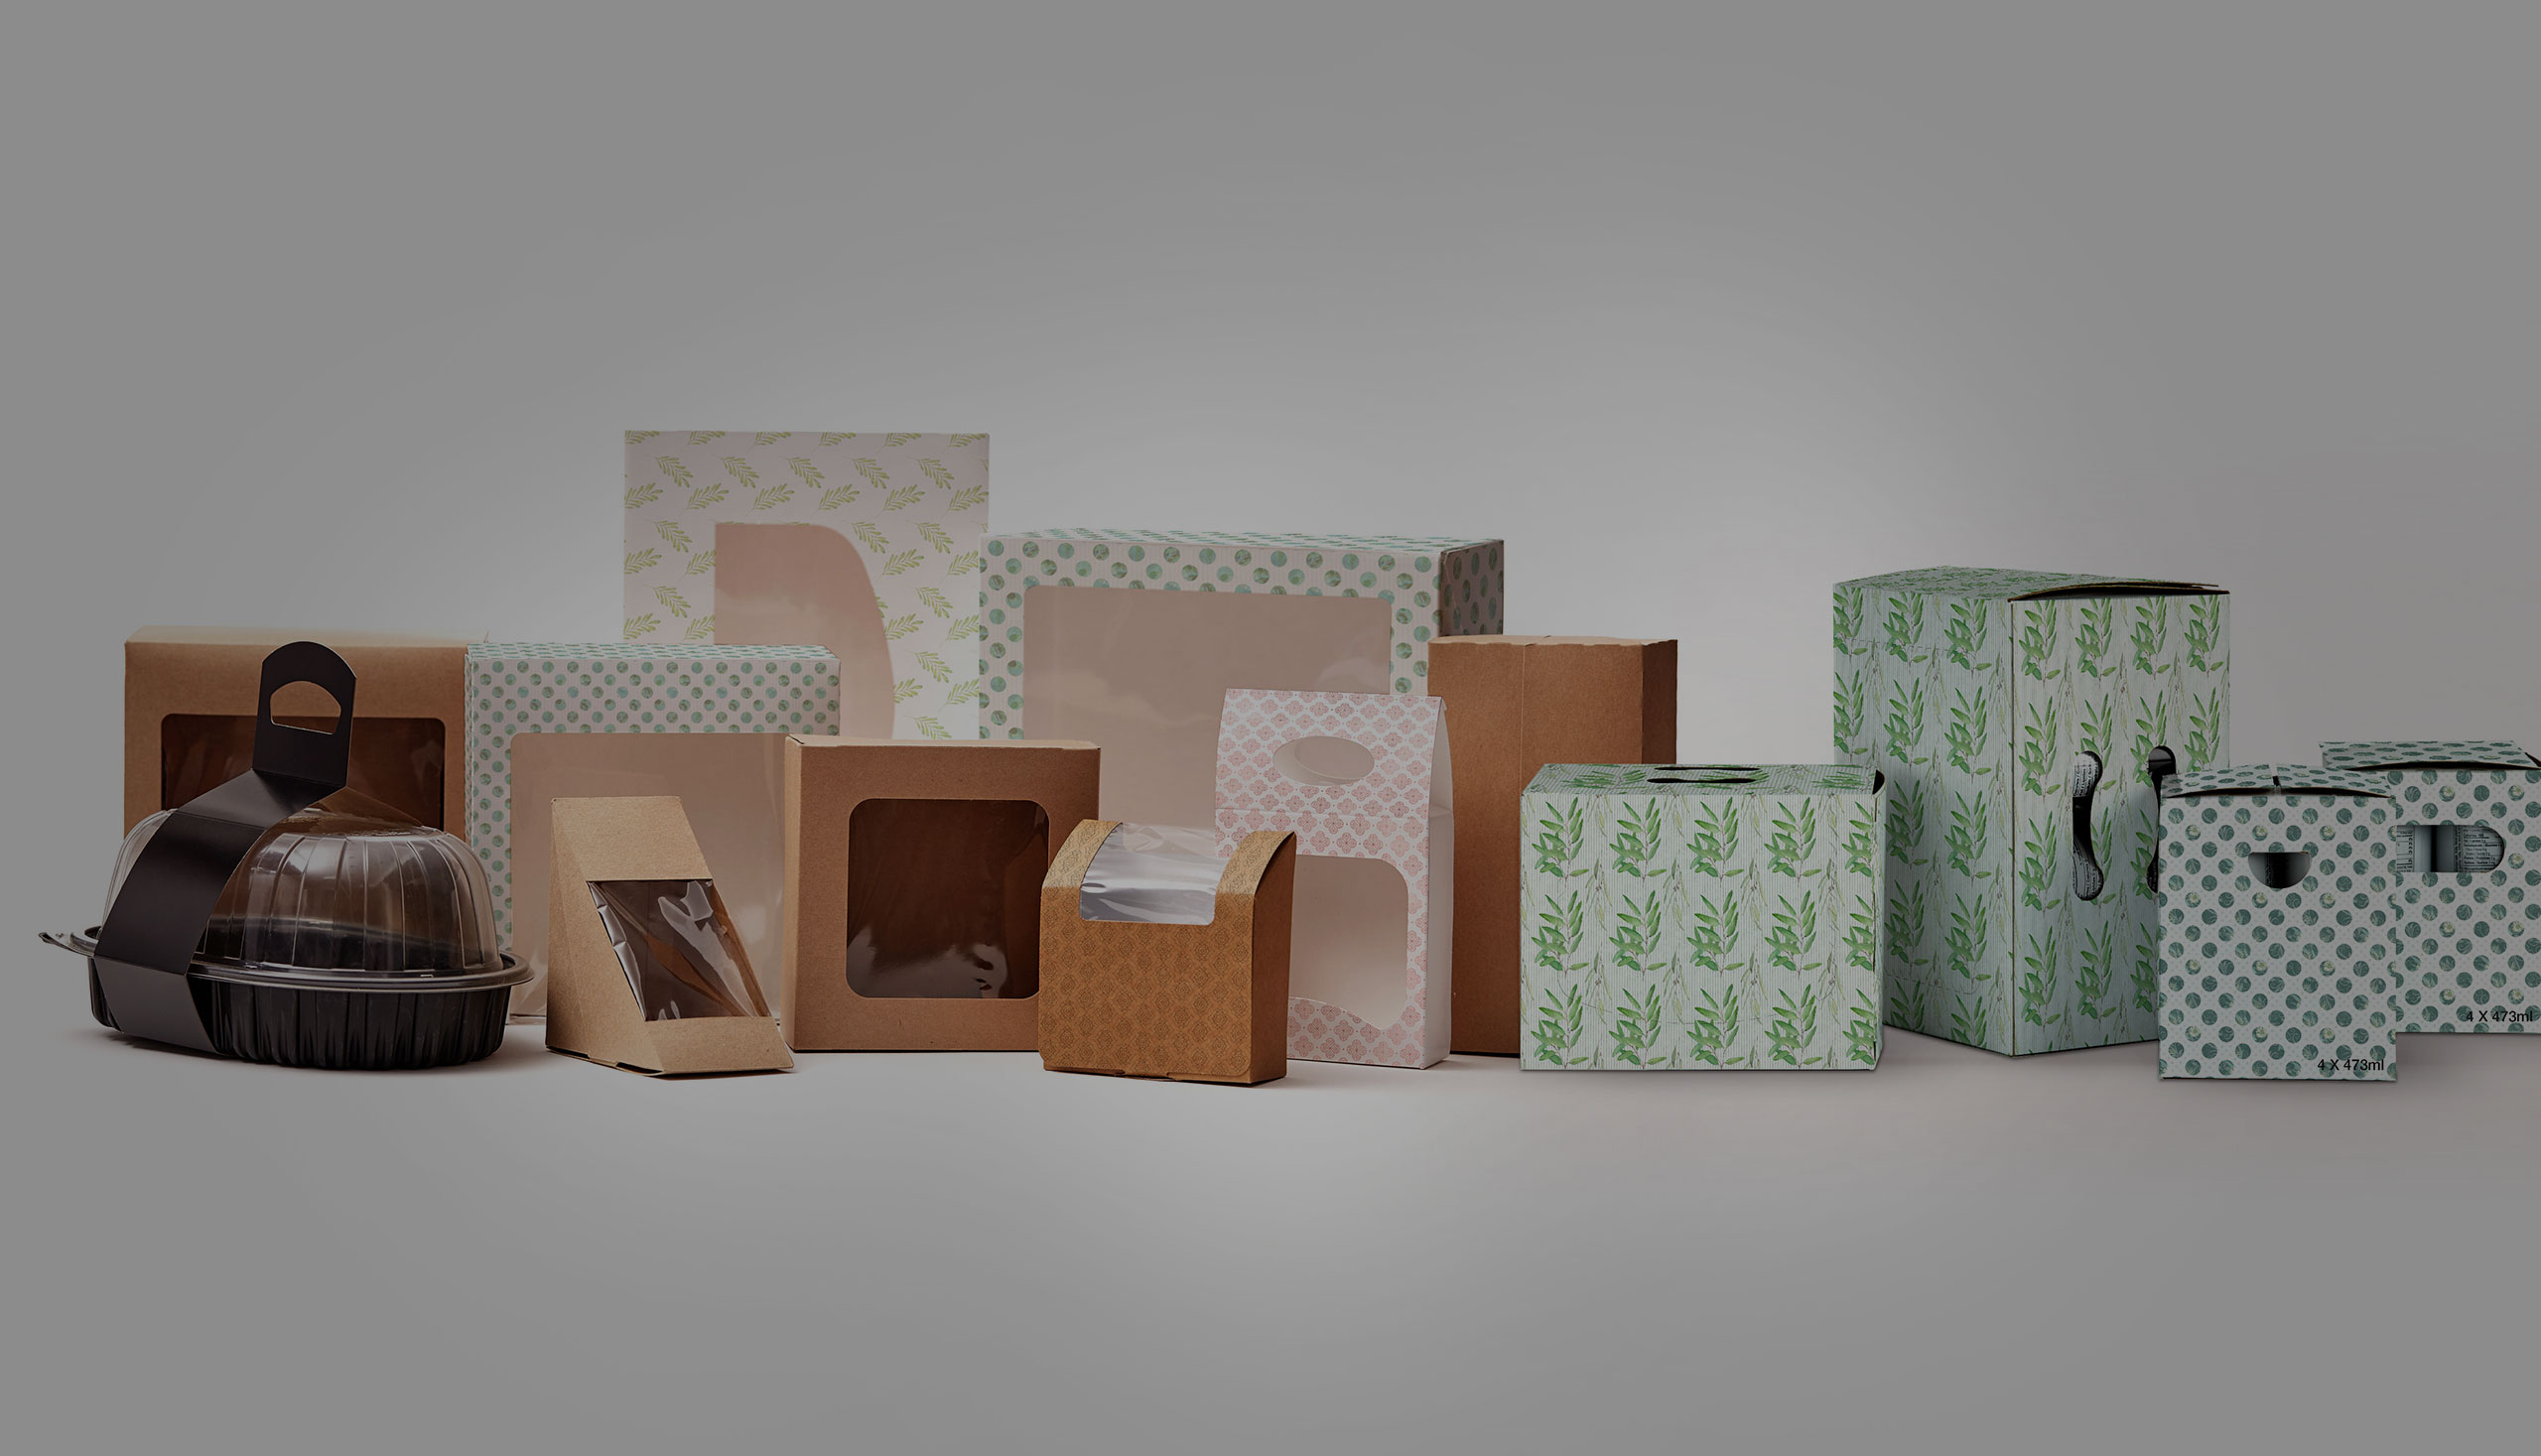 Bakery, Deli, & Takeout Packaging